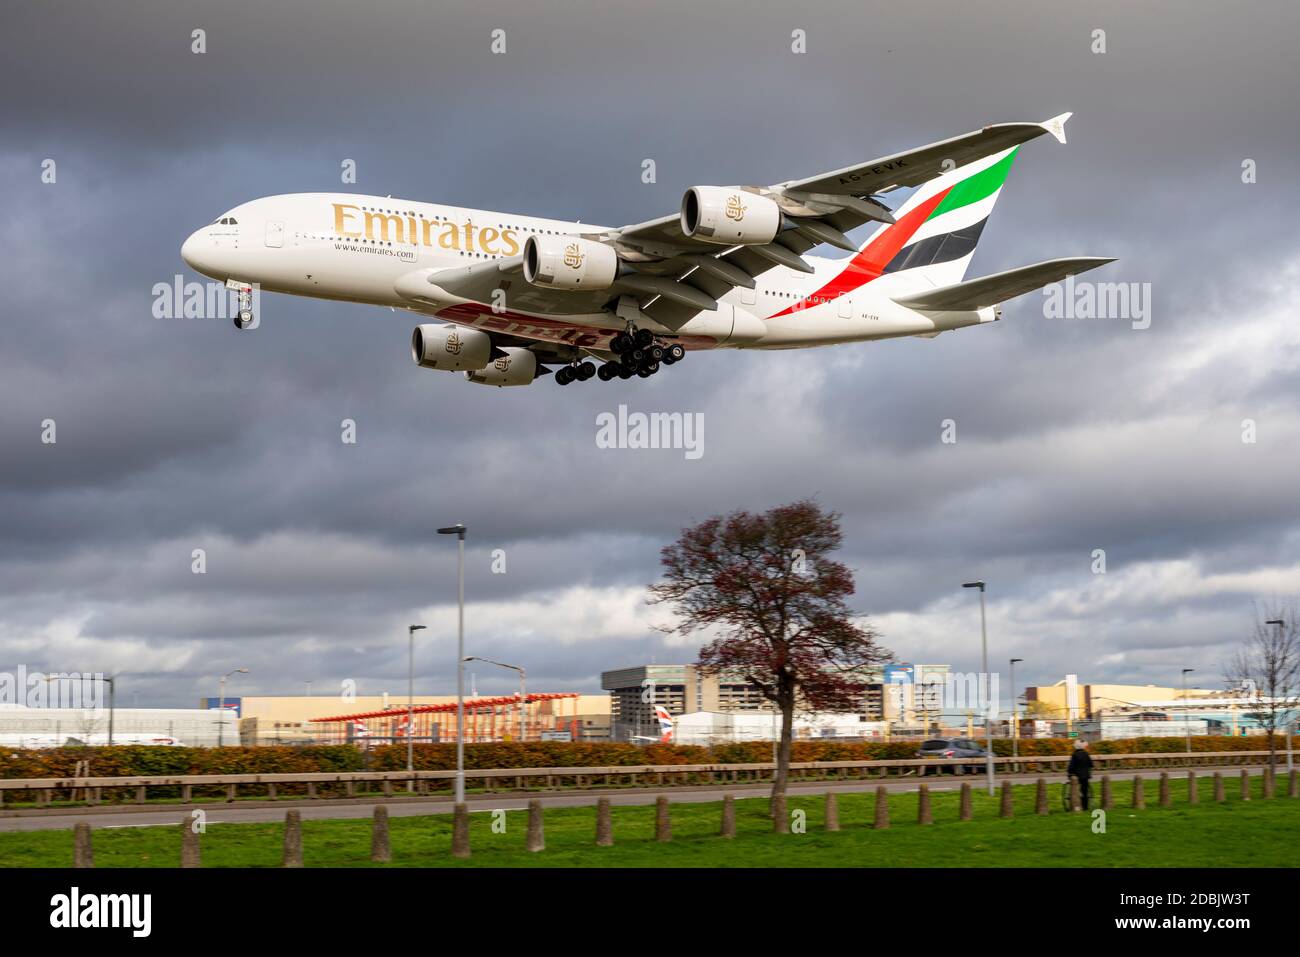 Emirates Airbus A380 super jumbo airliner jet plane landing at London Heathrow Airport, UK, passing over the A30 Great South West Road under clouds Stock Photo